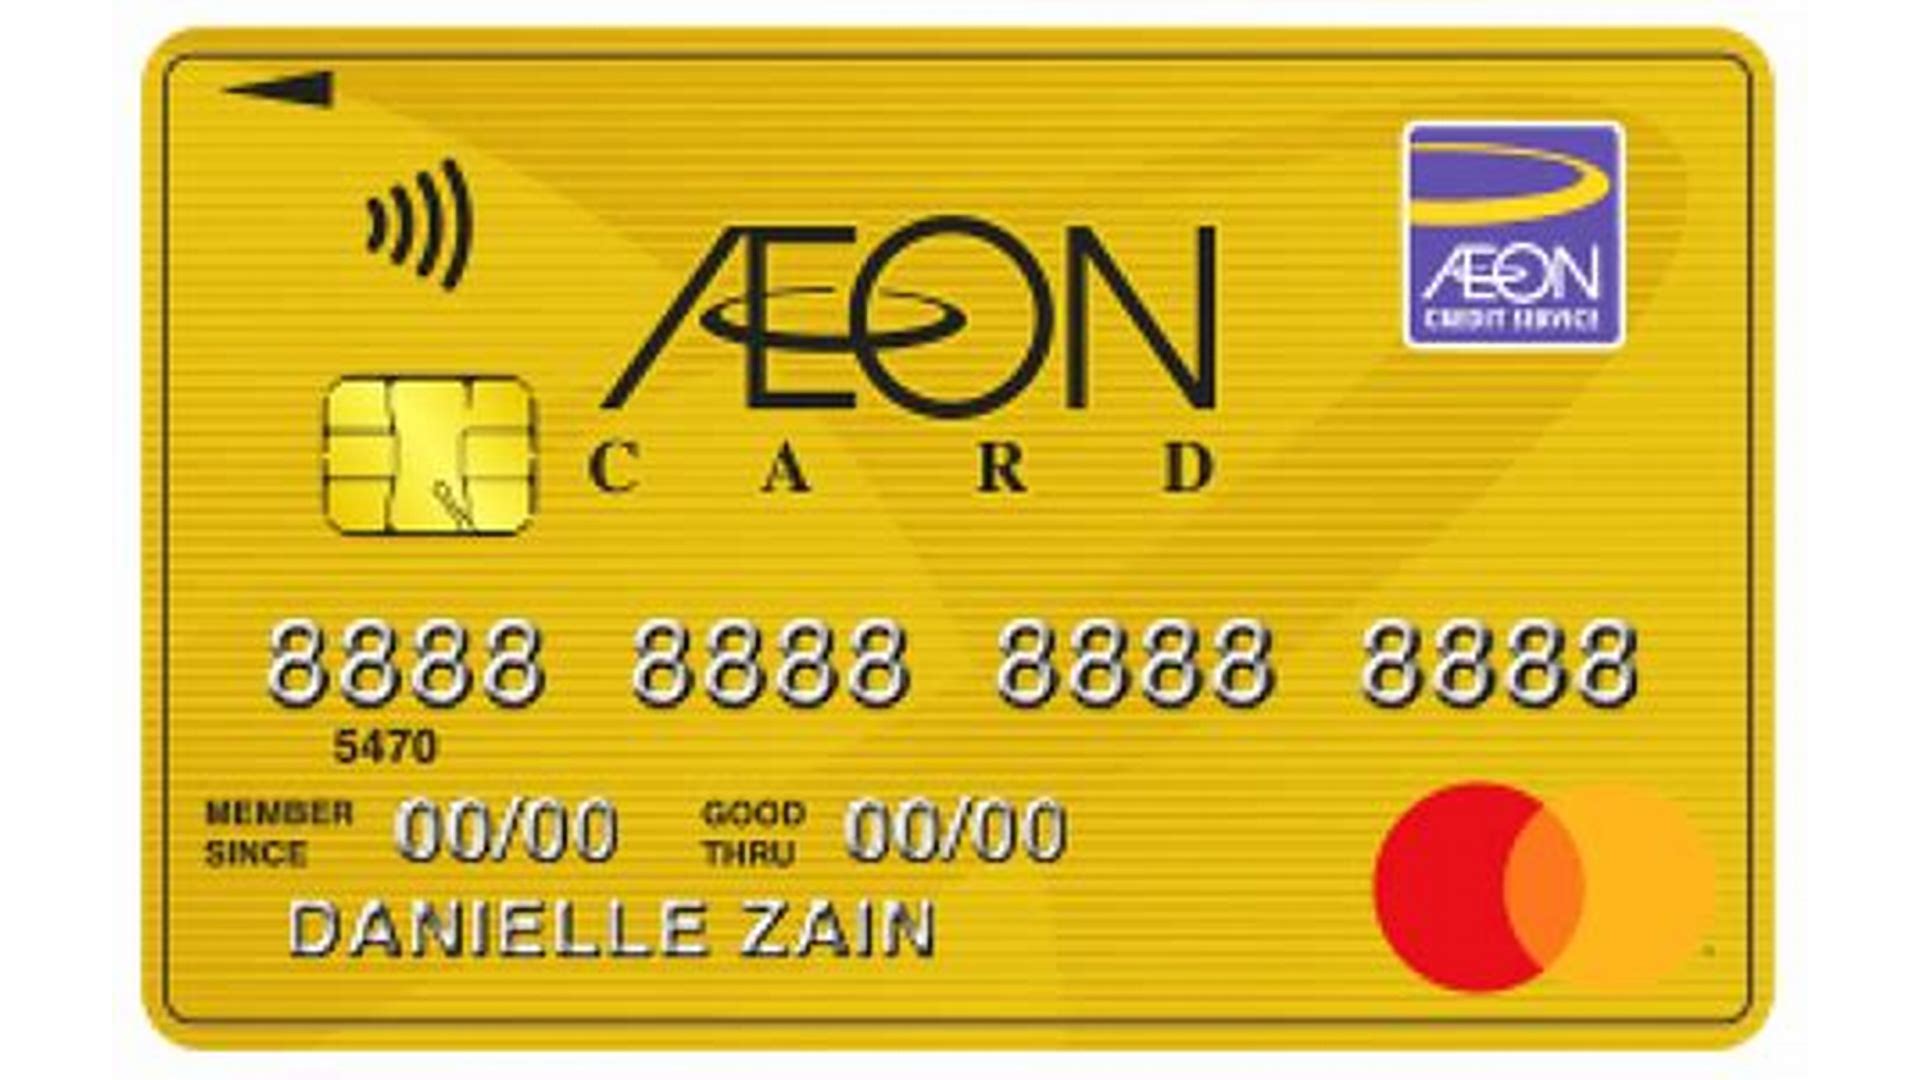 Comparison-of-benefits-and-rewards-Aeon-Credit-Card-with-other-credit-cards